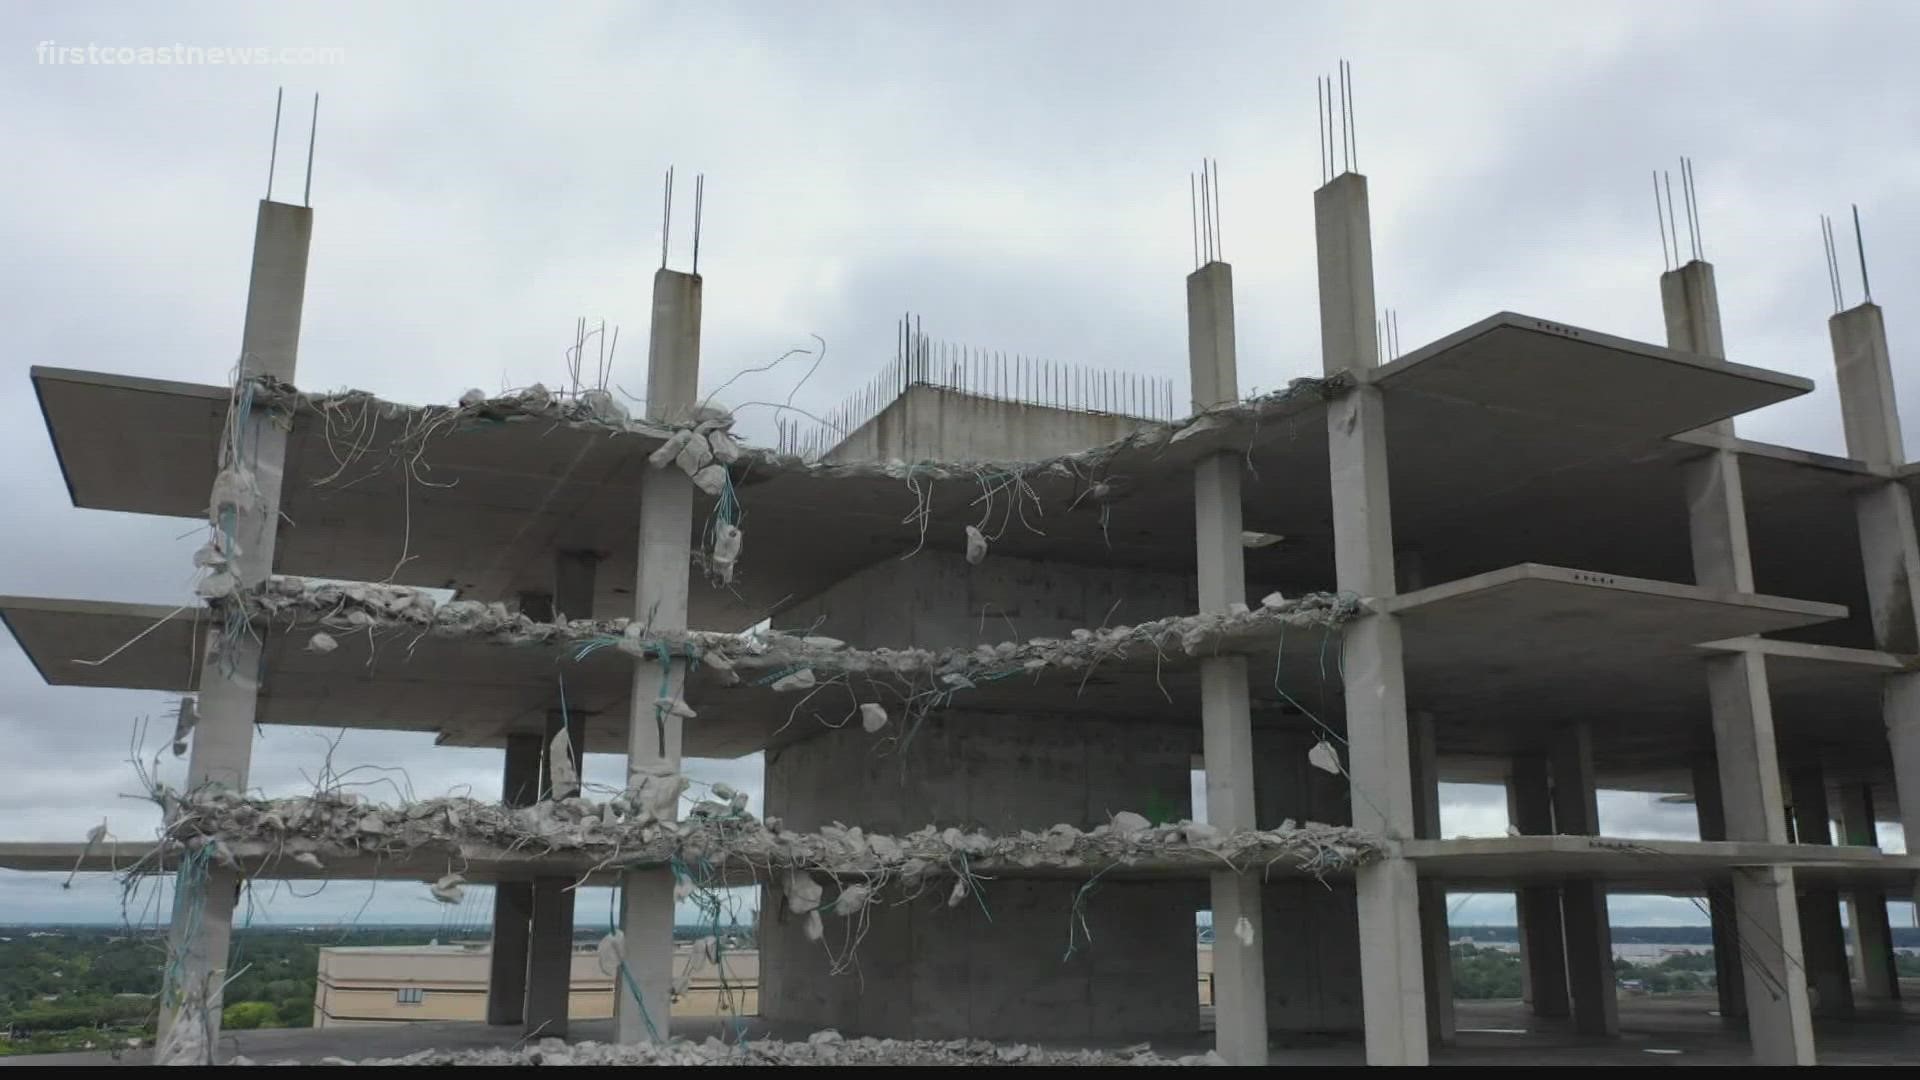 City leaders are speaking out after the demolition of an eyesore along the Downtown Jacksonville skyline has been delayed yet again.